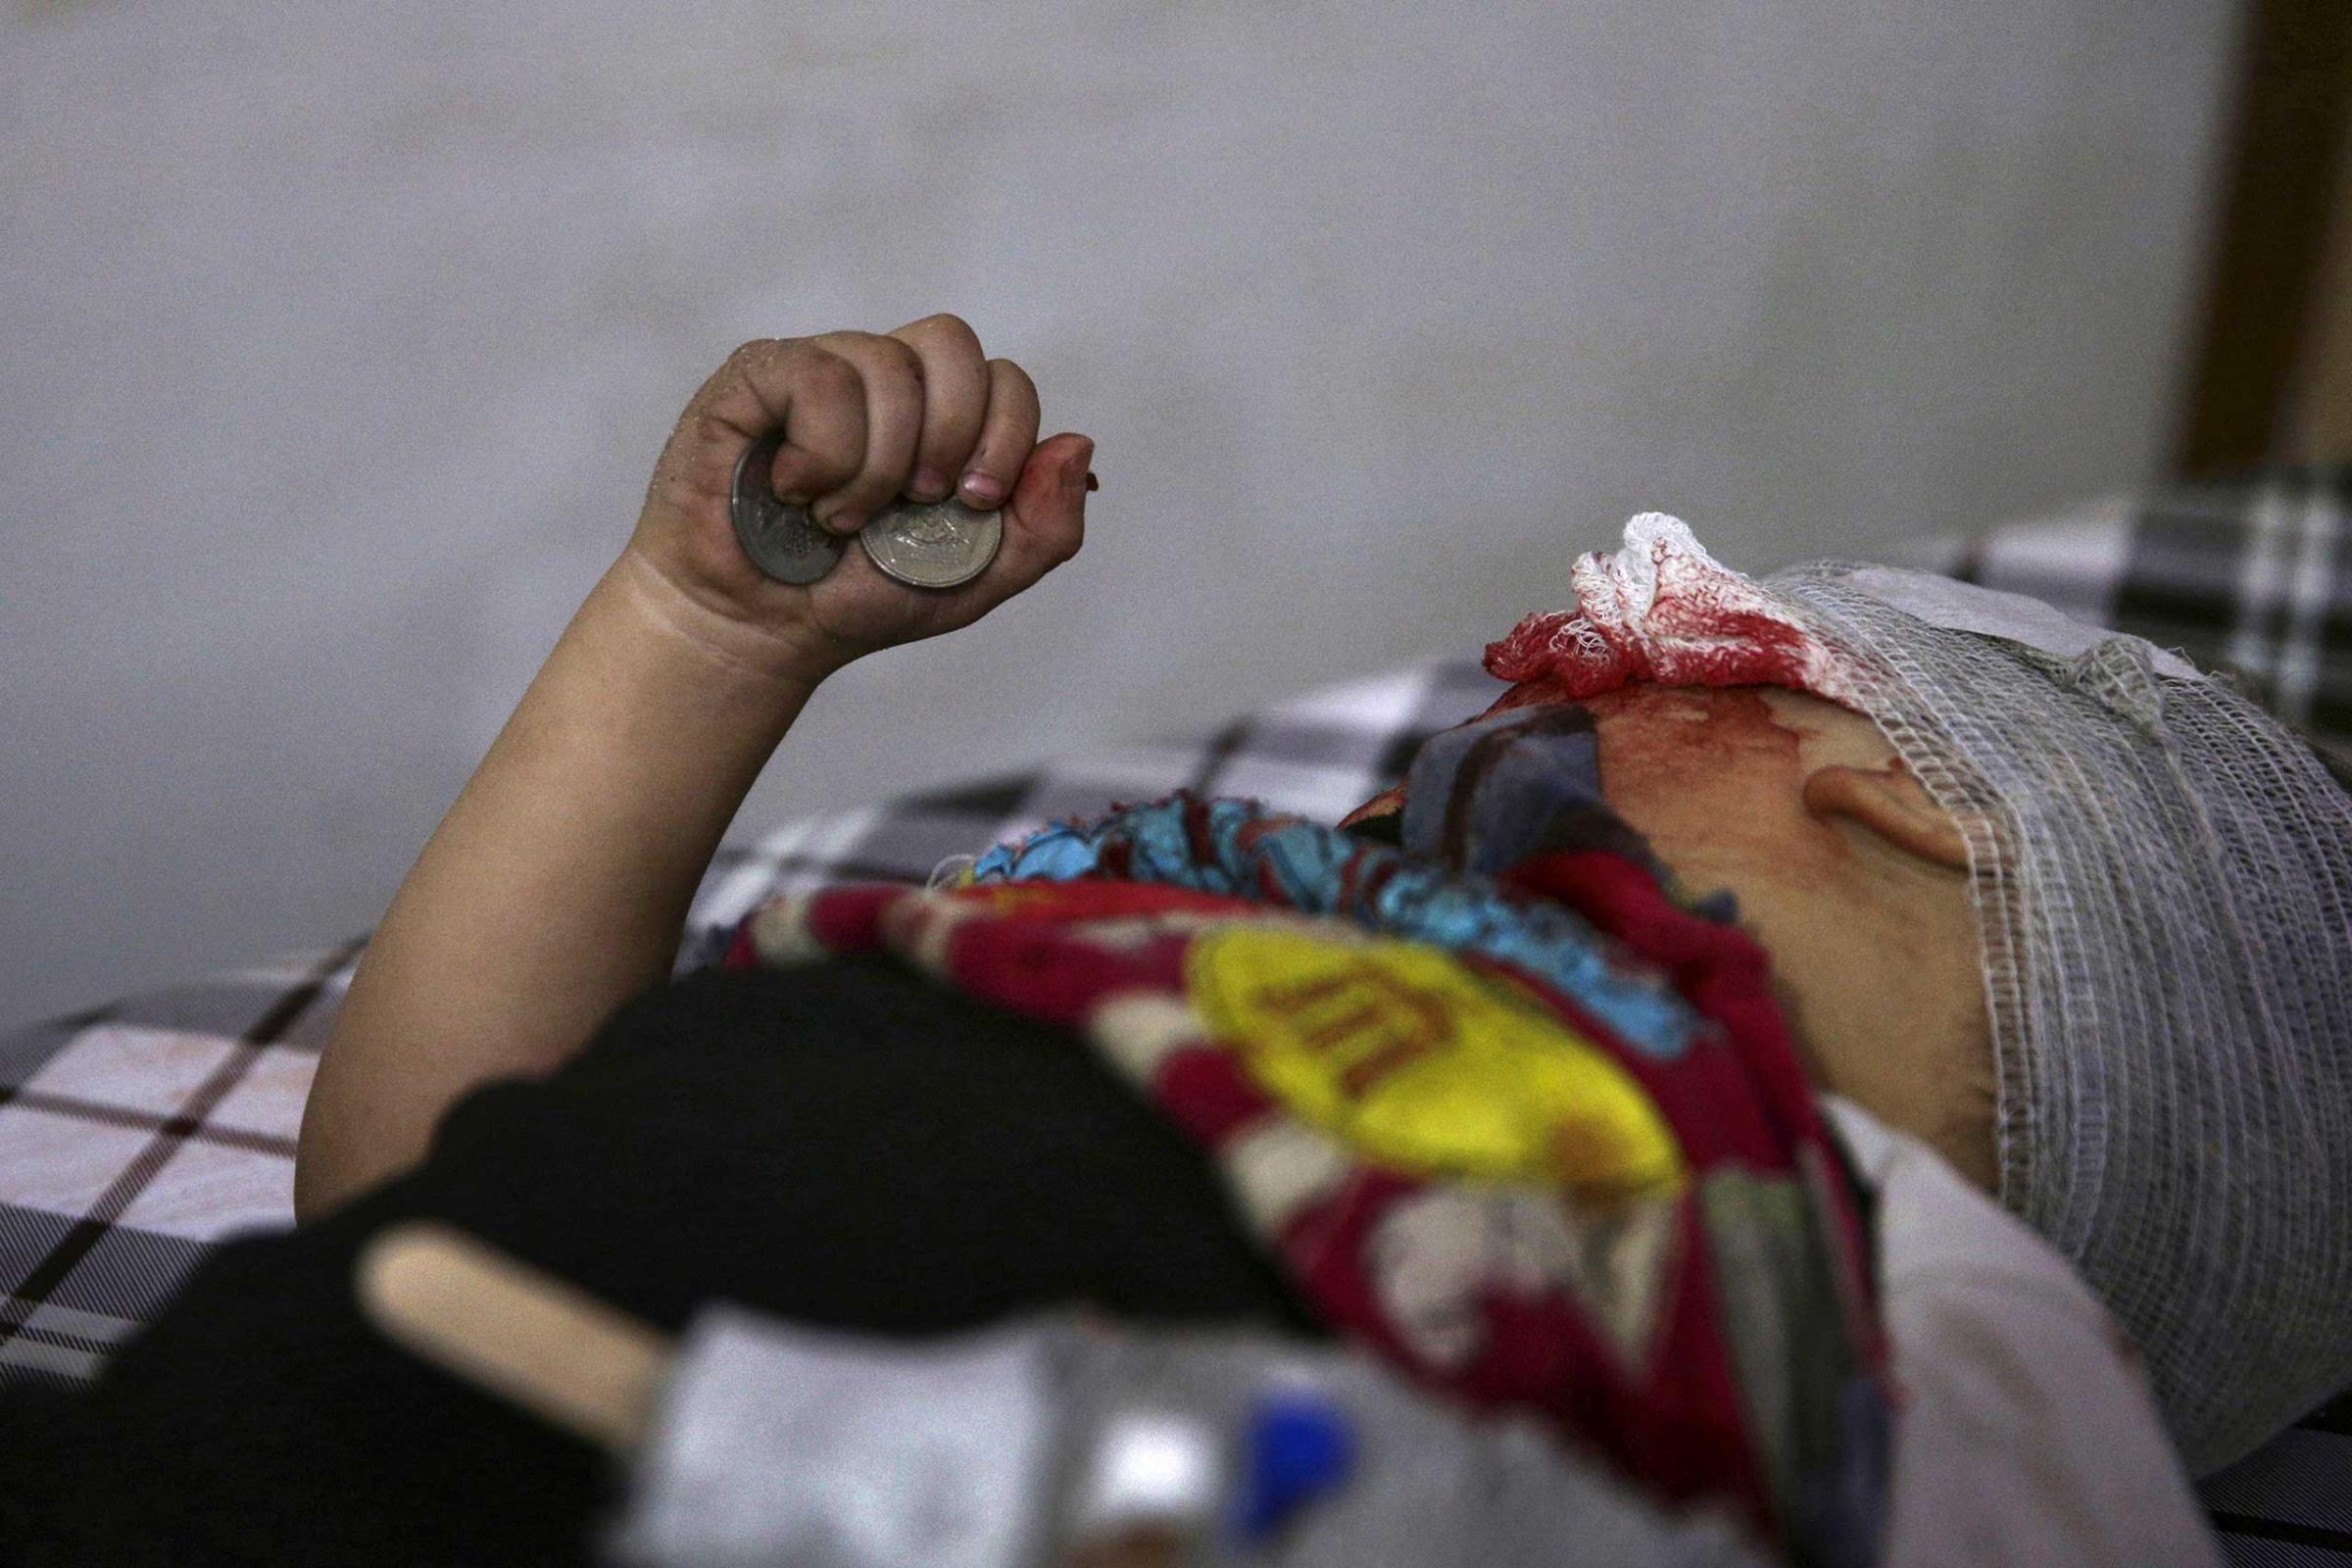 An injured child holds coins in his hand as he lies on a bed inside a field hospital, after what activists said was shelling by forces loyal to Syria's President Bashar al-Assad, in the Douma neighborhood of Damascus, Syria November 29, 2015.